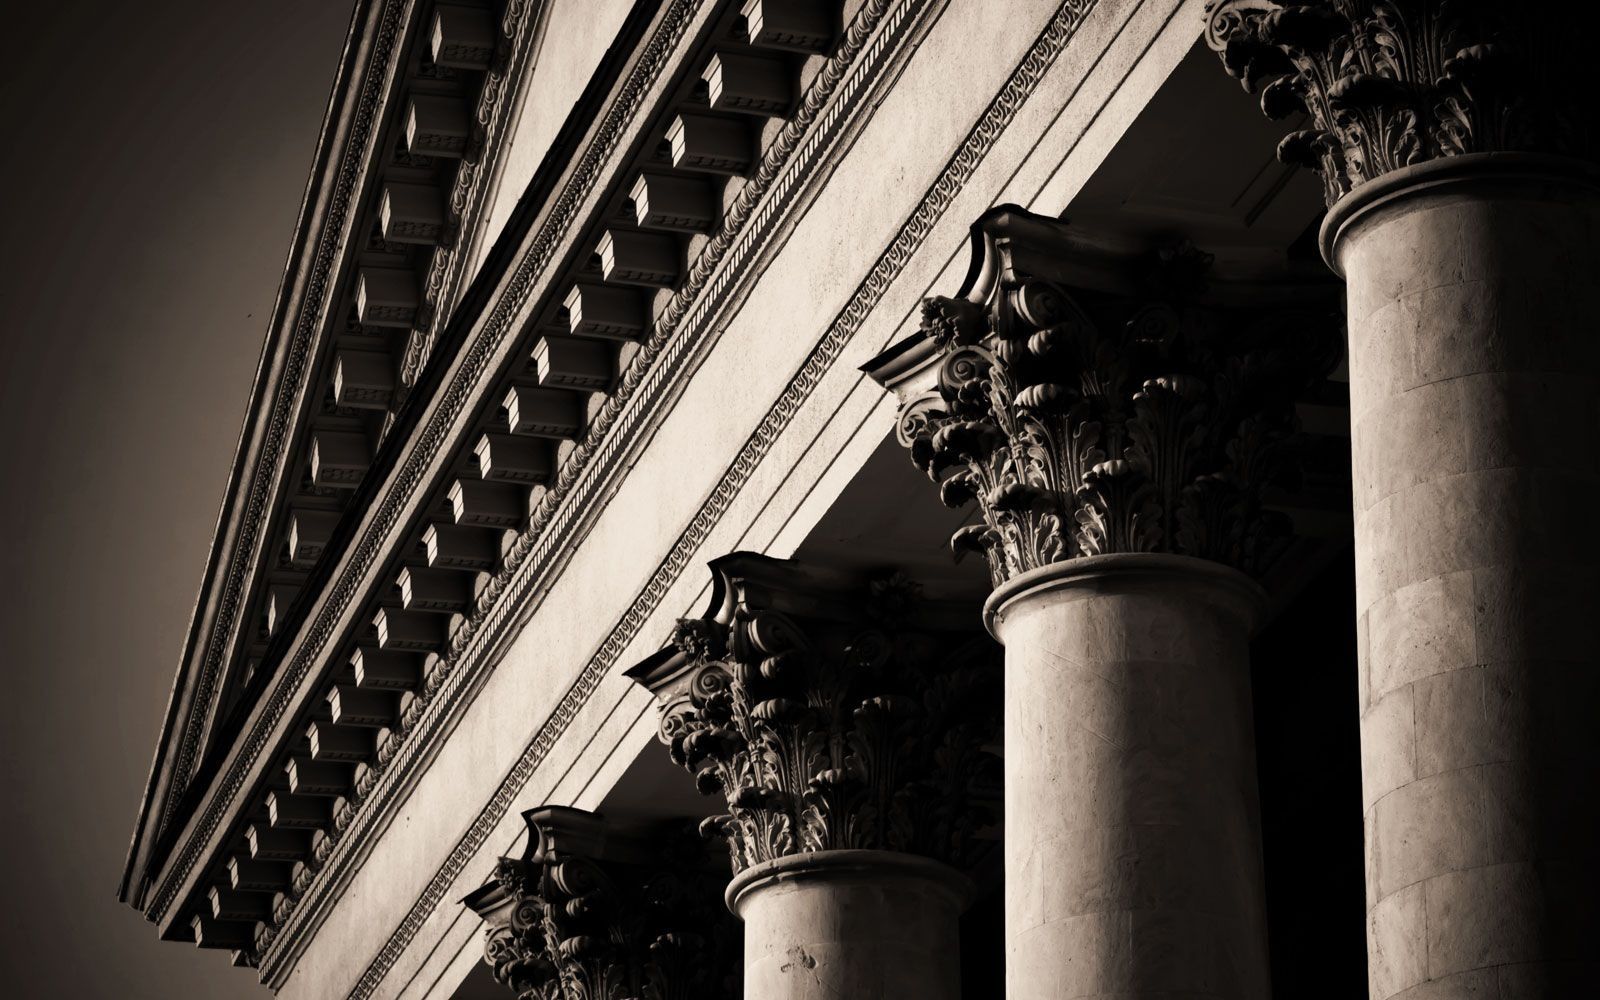 moody looking image of columns holding up the roof of a courthouse